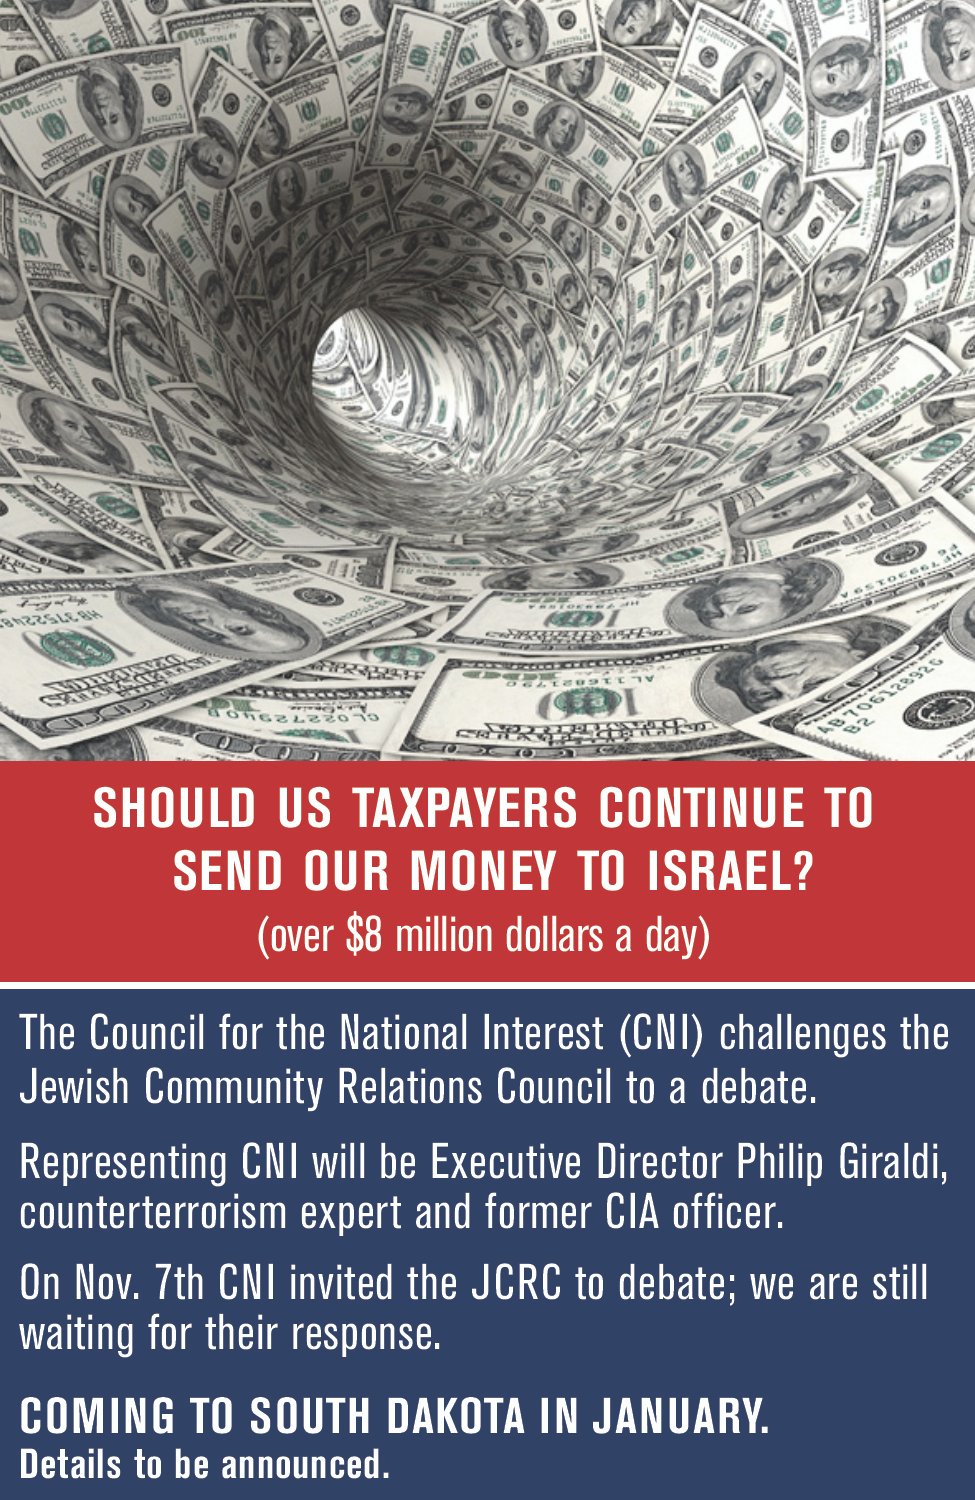 Should US Taxpayers Continue to Send Our Money to Israel?